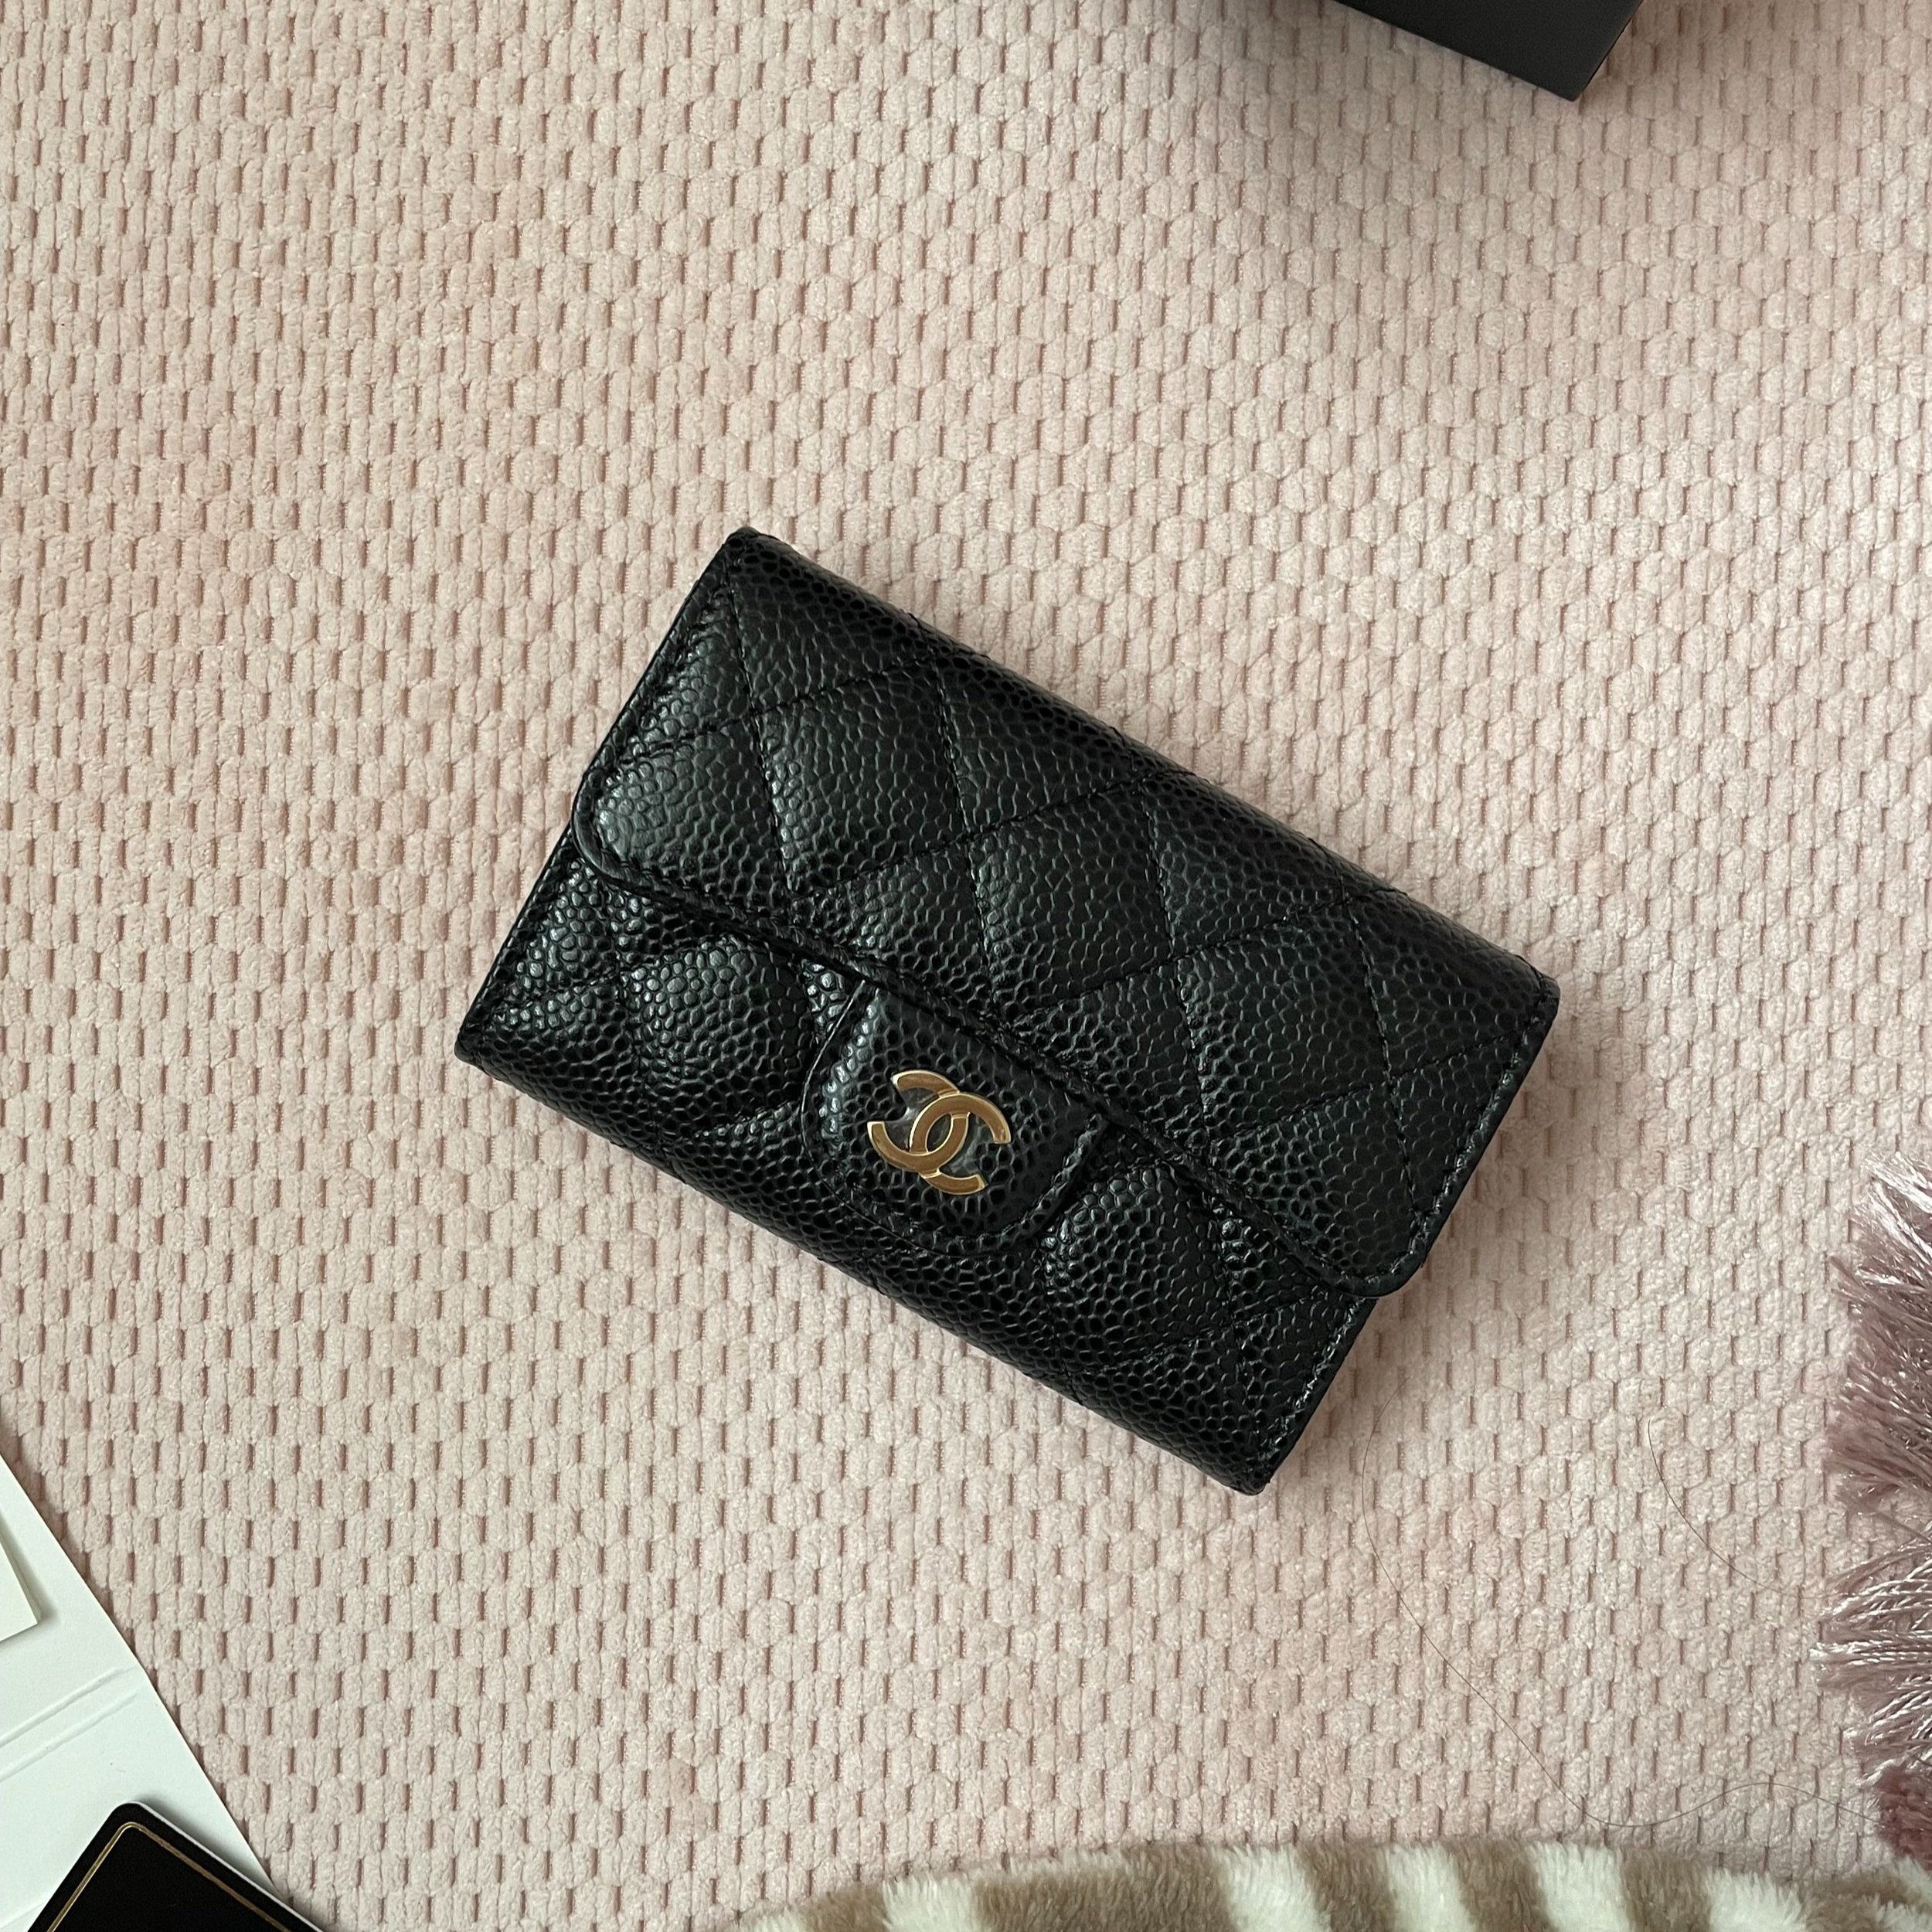 chanel grocery store bag holder